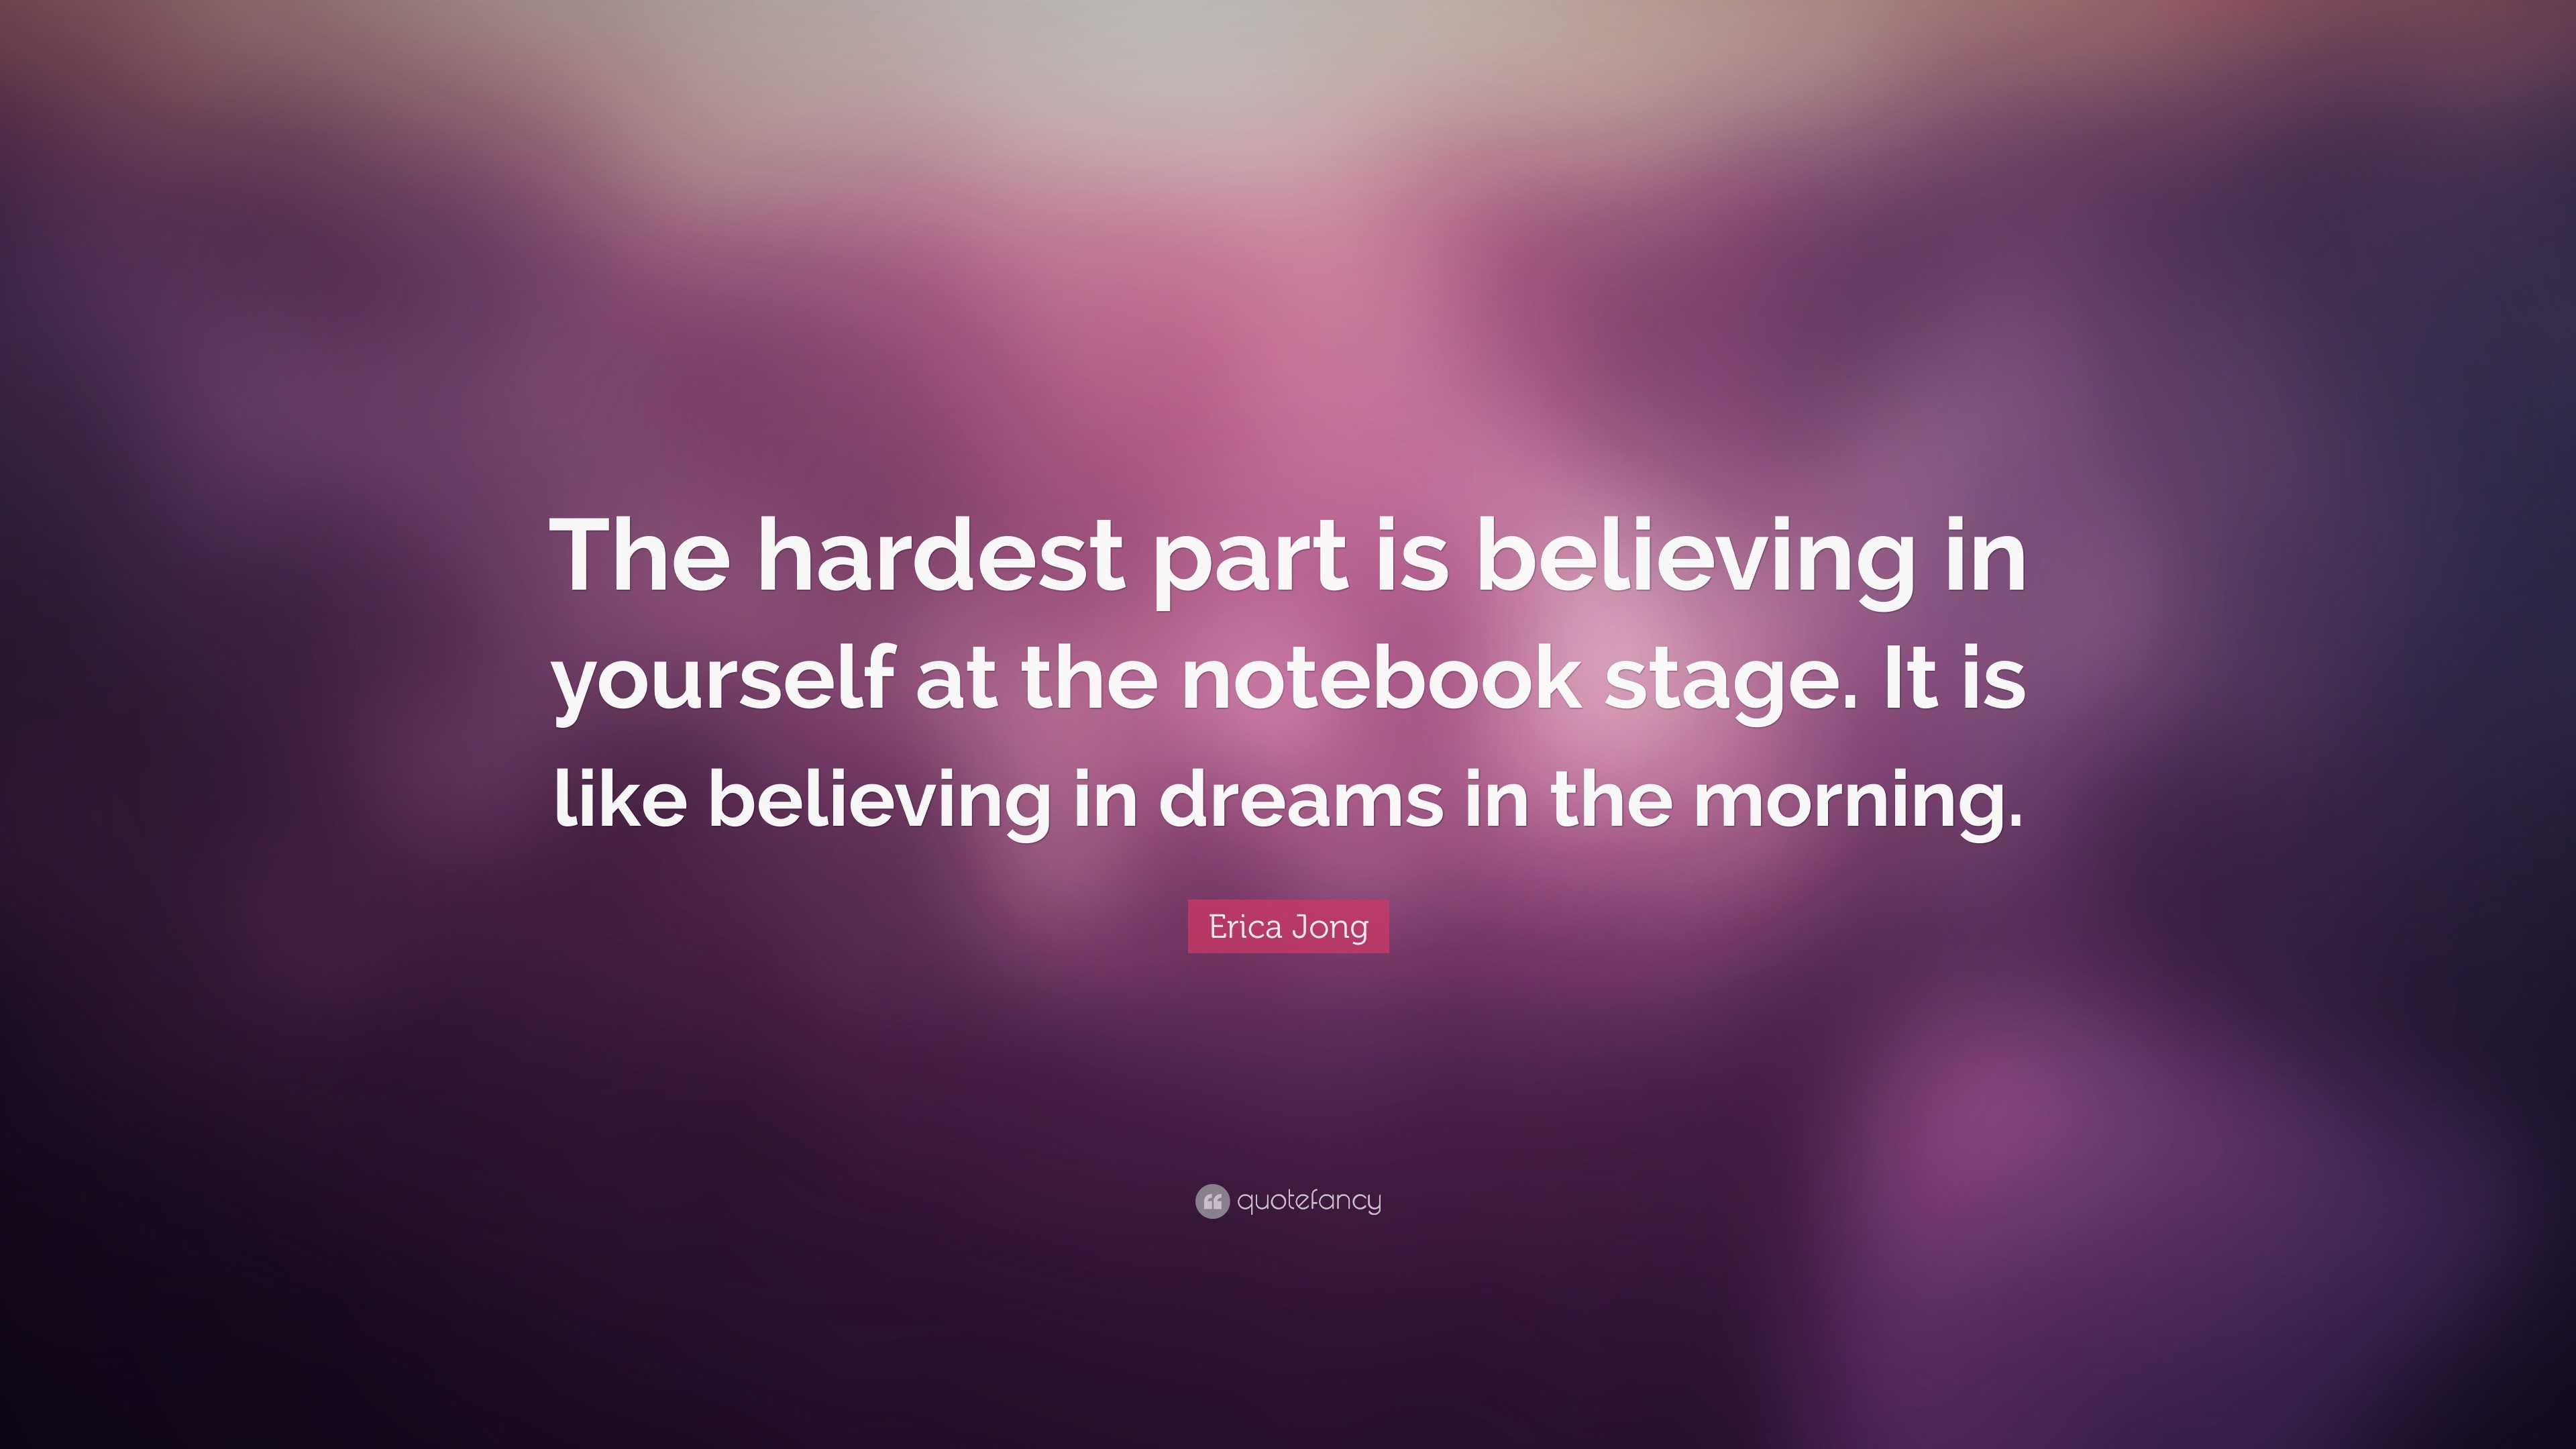 3840x2160 Erica Jong Quote: “The hardest part is believing in yourself at the notebook  stage